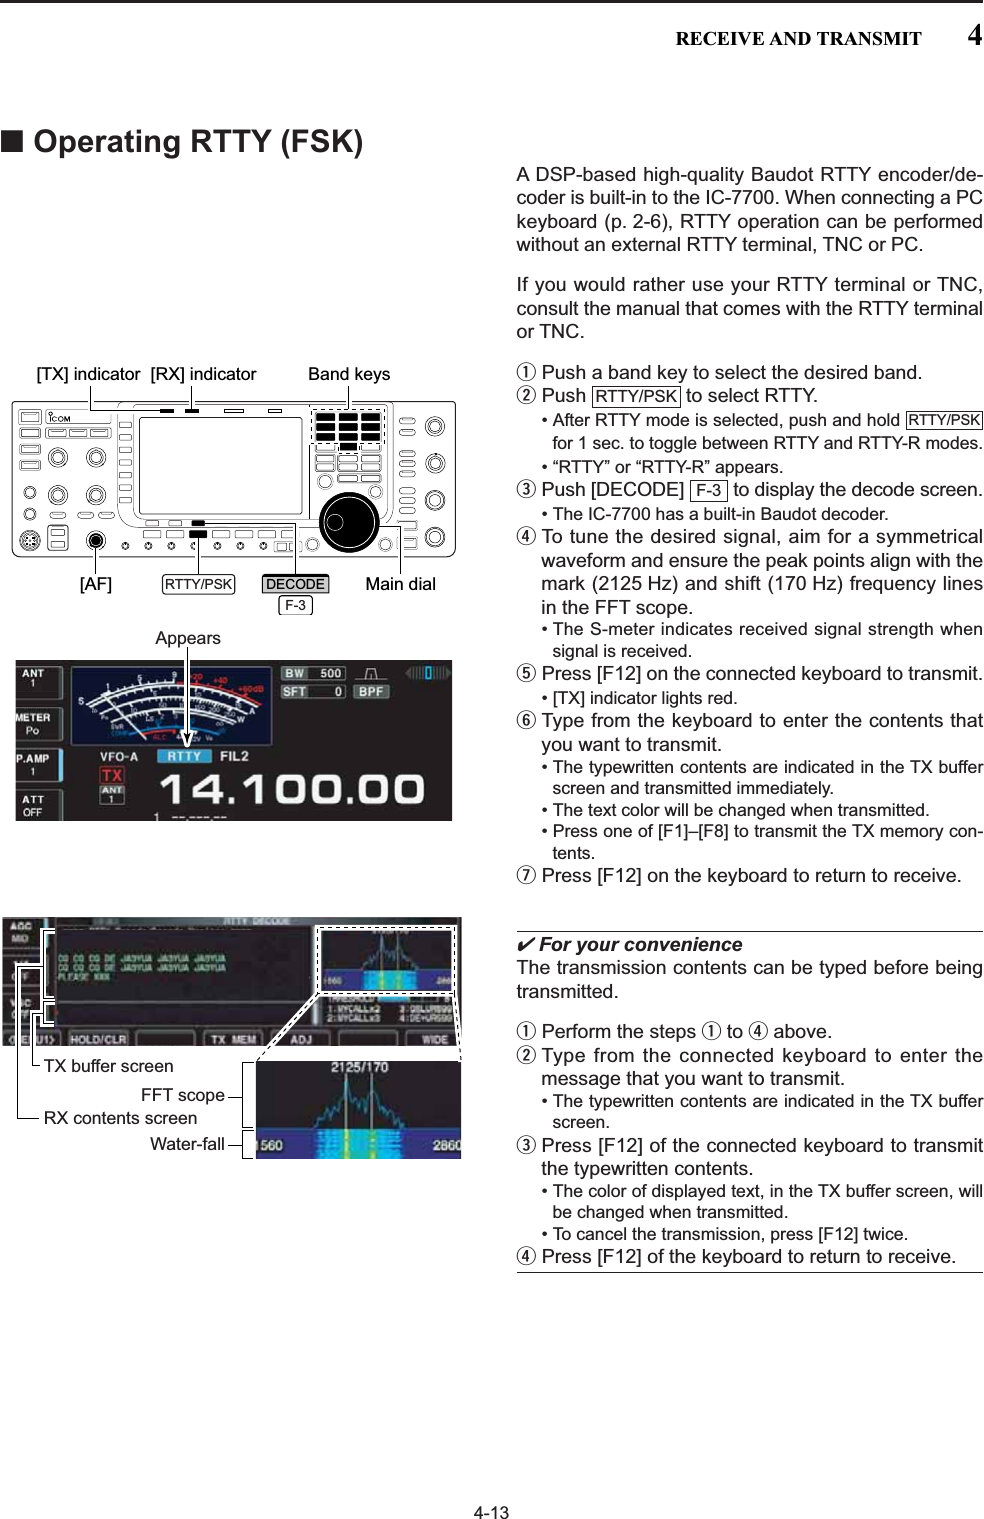 4-13■Operating RTTY (FSK)A DSP-based high-quality Baudot RTTY encoder/de-coder is built-in to the IC-7700. When connecting a PCkeyboard (p. 2-6), RTTY operation can be performedwithout an external RTTY terminal, TNC or PC.If you would rather use your RTTY terminal or TNC,consult the manual that comes with the RTTY terminalor TNC.qPush a band key to select the desired band.wPush  to select RTTY.• After RTTY mode is selected, push and hold for 1 sec. to toggle between RTTY and RTTY-R modes.• “RTTY” or “RTTY-R” appears.ePush [DECODE]  to display the decode screen.• The IC-7700 has a built-in Baudot decoder.rTo tune the desired signal, aim for a symmetricalwaveform and ensure the peak points align with themark (2125 Hz) and shift (170 Hz) frequency linesin the FFT scope. • The S-meter indicates received signal strength whensignal is received.tPress [F12] on the connected keyboard to transmit.• [TX] indicator lights red.yType from the keyboard to enter the contents thatyou want to transmit.• The typewritten contents are indicated in the TX bufferscreen and transmitted immediately.• The text color will be changed when transmitted. • Press one of [F1]–[F8] to transmit the TX memory con-tents.uPress [F12] on the keyboard to return to receive.✔For your convenienceThe transmission contents can be typed before beingtransmitted.qPerform the steps qto rabove.wType from the connected keyboard to enter themessage that you want to transmit.• The typewritten contents are indicated in the TX bufferscreen.ePress [F12] of the connected keyboard to transmitthe typewritten contents.• The color of displayed text, in the TX buffer screen, willbe changed when transmitted. • To cancel the transmission, press [F12] twice.rPress [F12] of the keyboard to return to receive.F-3RTTY/PSKRTTY/PSKFFT scopeTX buffer screenRX contents screenWater-fallAppears[TX] indicator [RX] indicator[AF] Main dialBand keysRTTY/PSKF-3DECODE4RECEIVE AND TRANSMIT